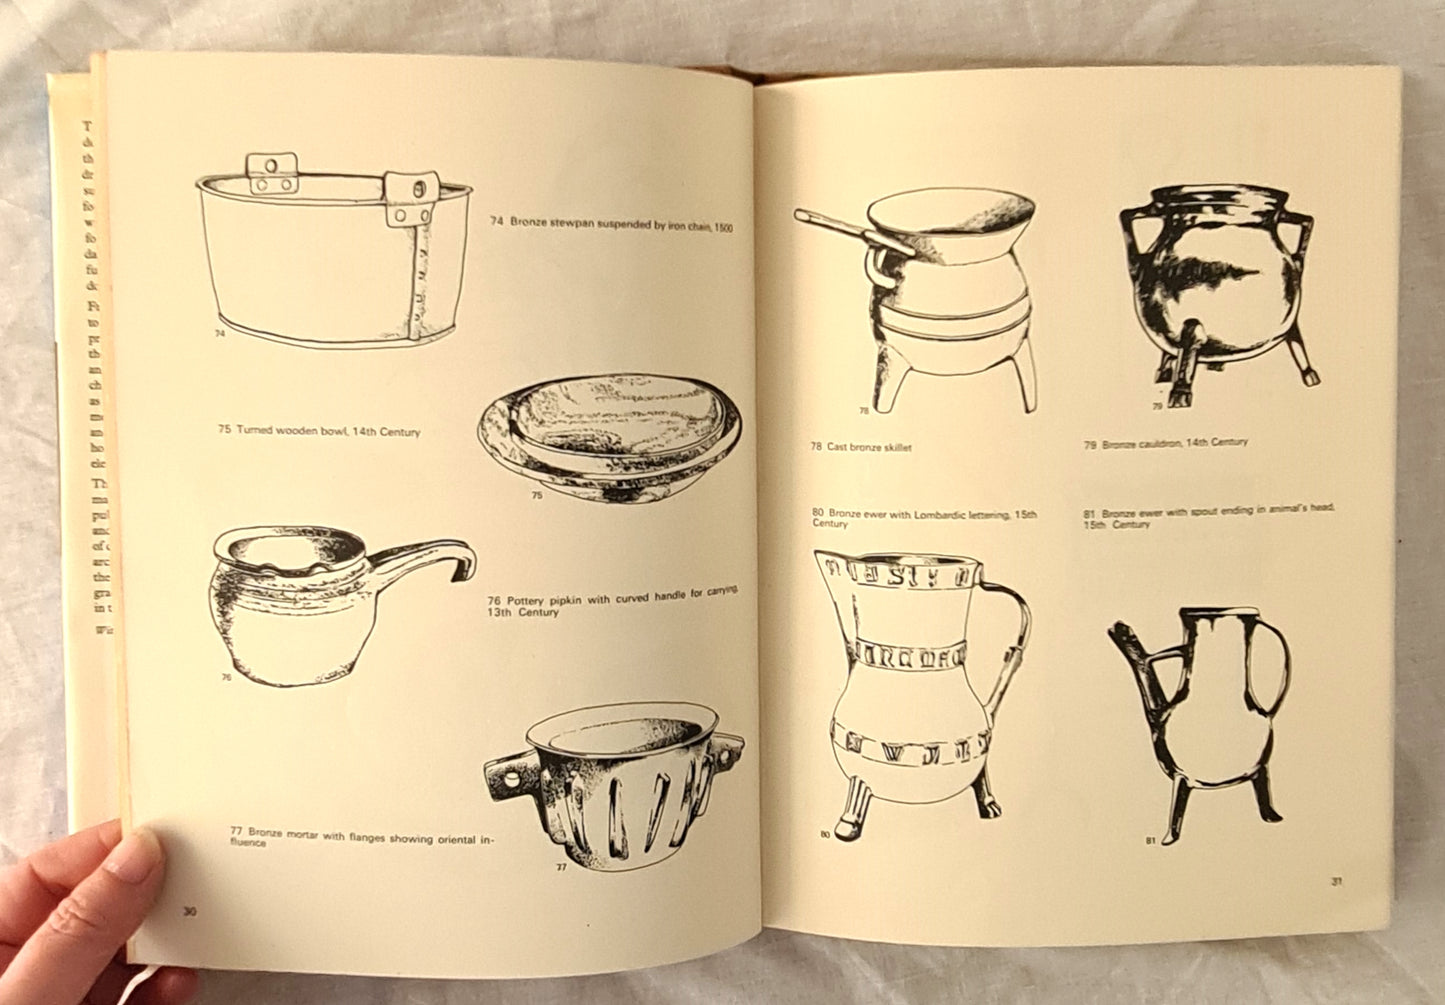 British Domestic Design Through the Ages by Brian Keogh and Melvyn Gill